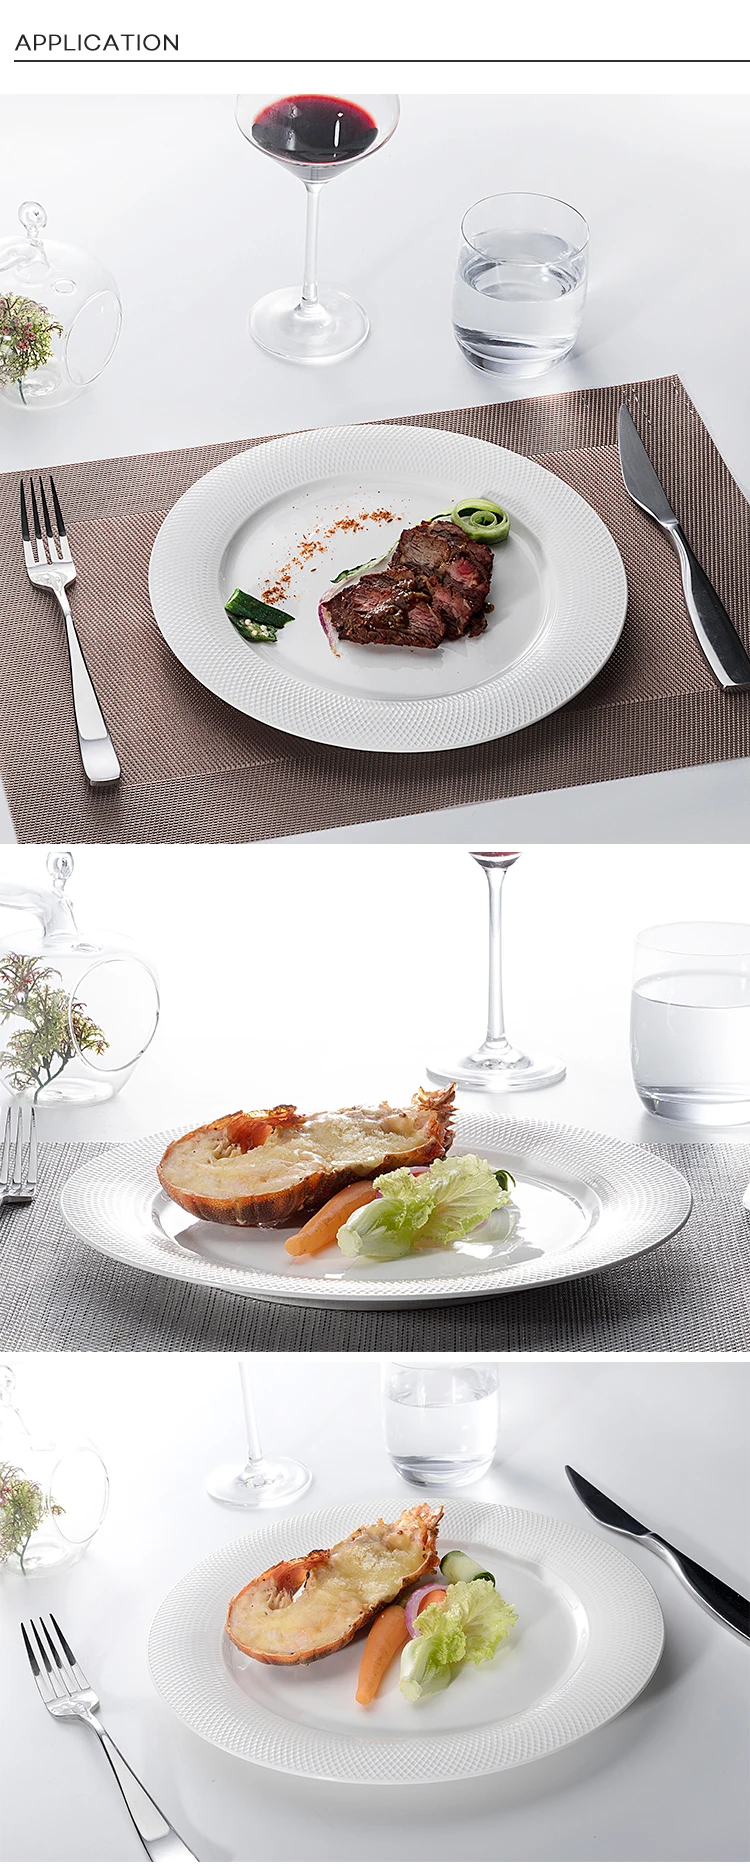 New Product Ideas 2019 Innovative for Hotels White Plates Ceramic Buffet Ware, Grid Design Crockery Tableware Flat Plate^